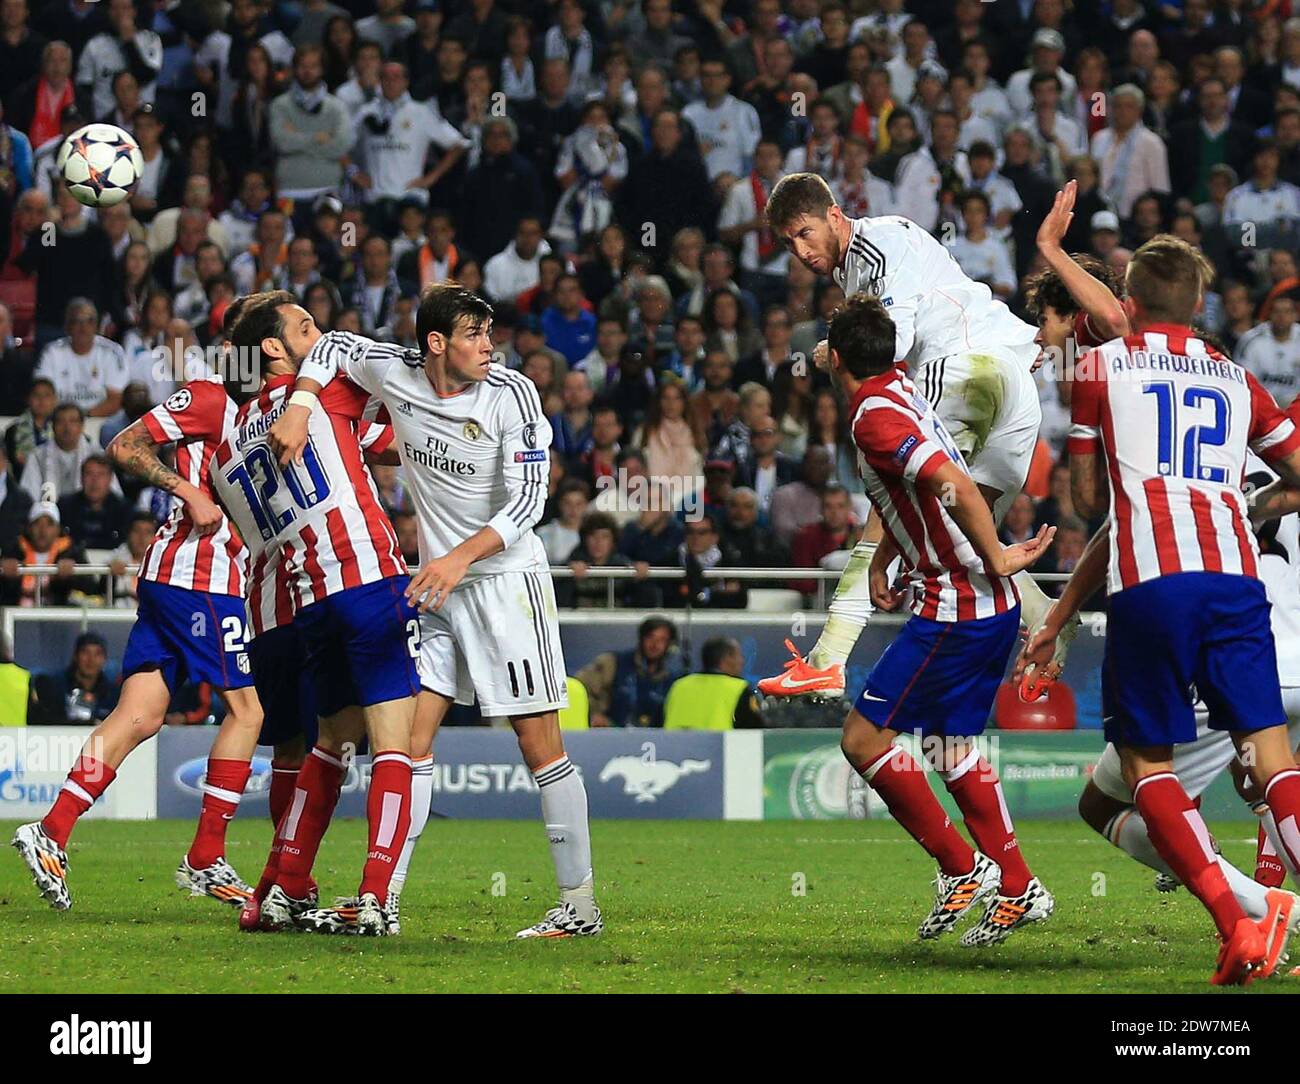 1 1 Tying Goal By Real Madrids Sergio Ramos In The 95 Minute During